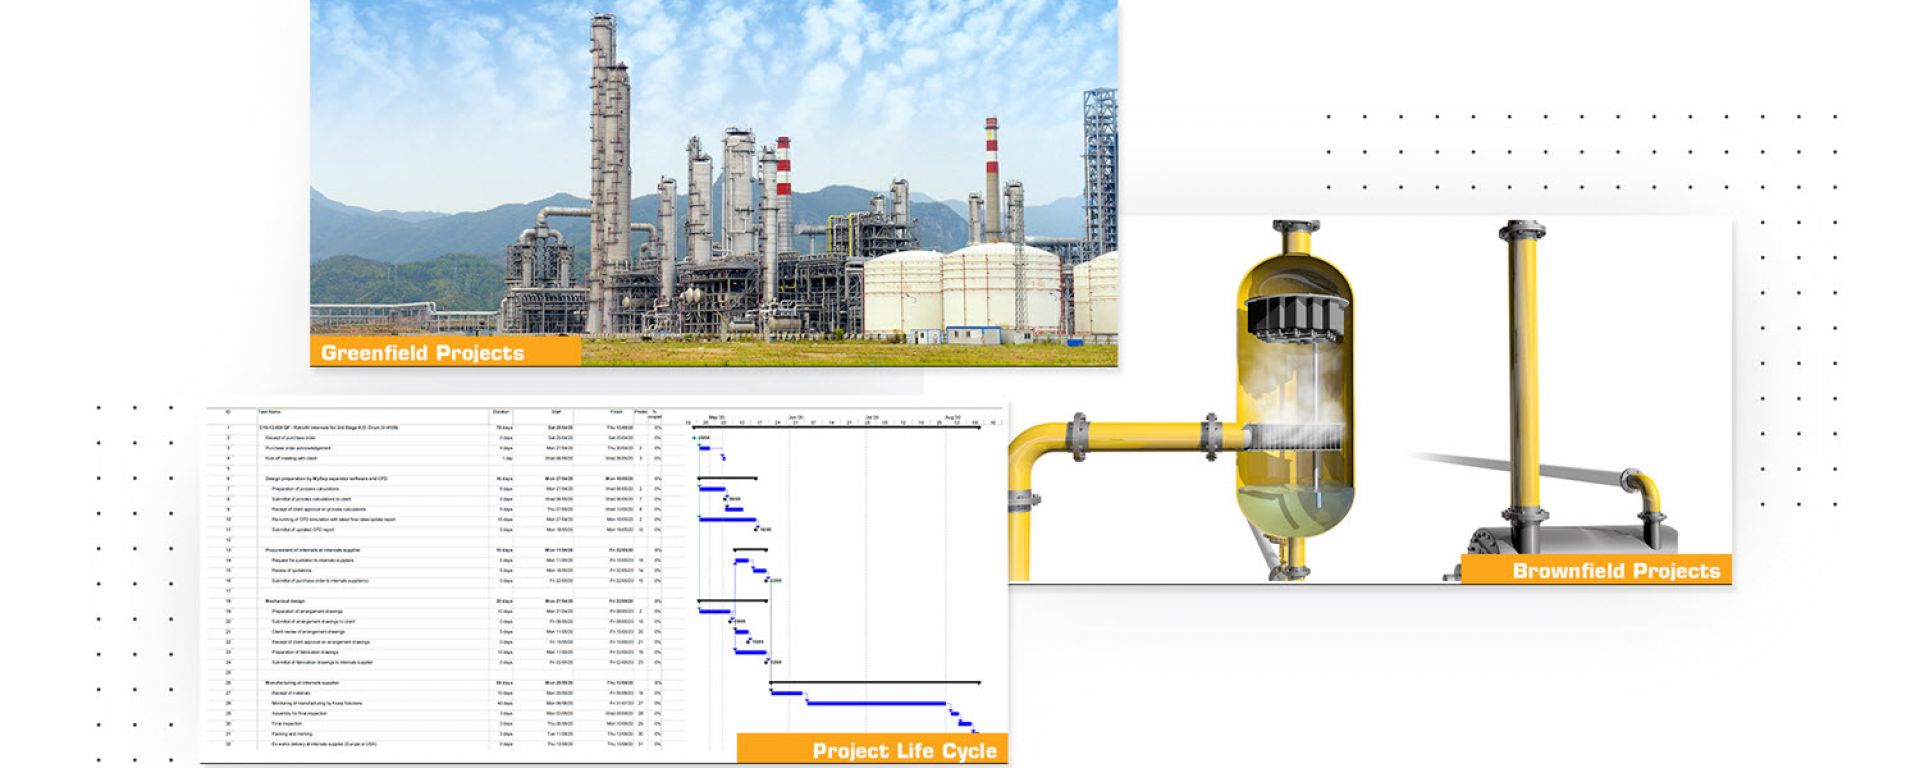 MySep Software Used in Greenfield and Brownfield Projects